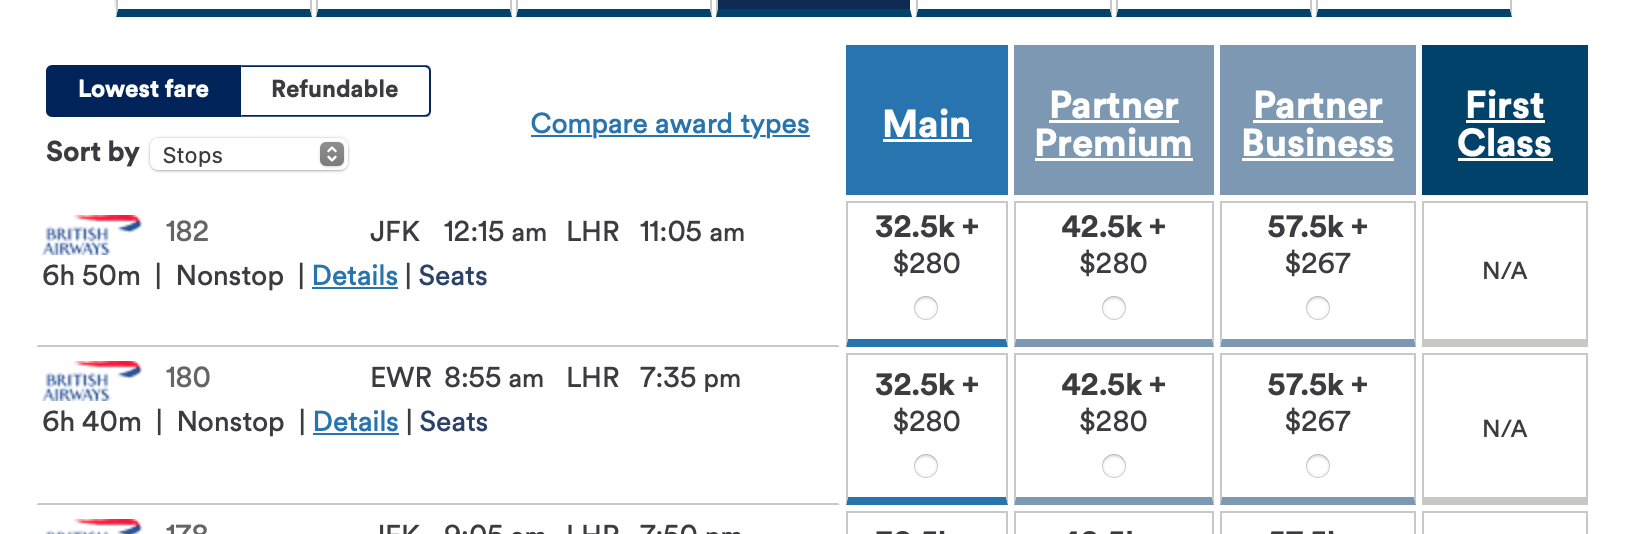 EWR to LHR with low taxes